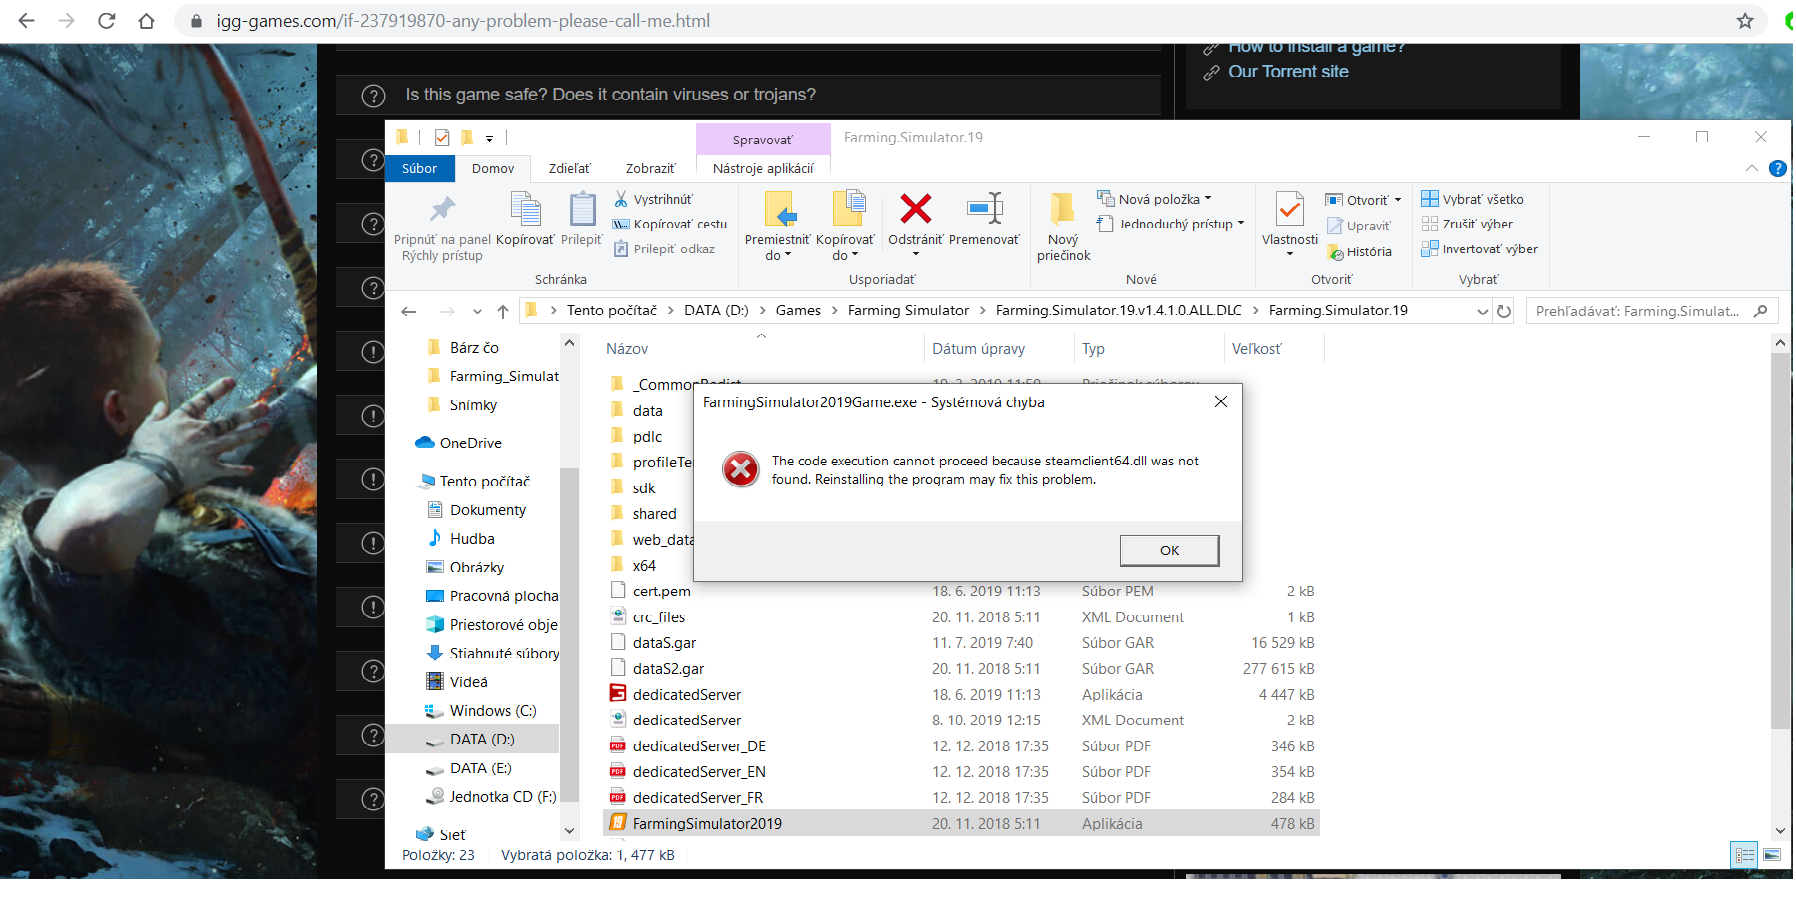 microsoft frontpage 2013 torrent